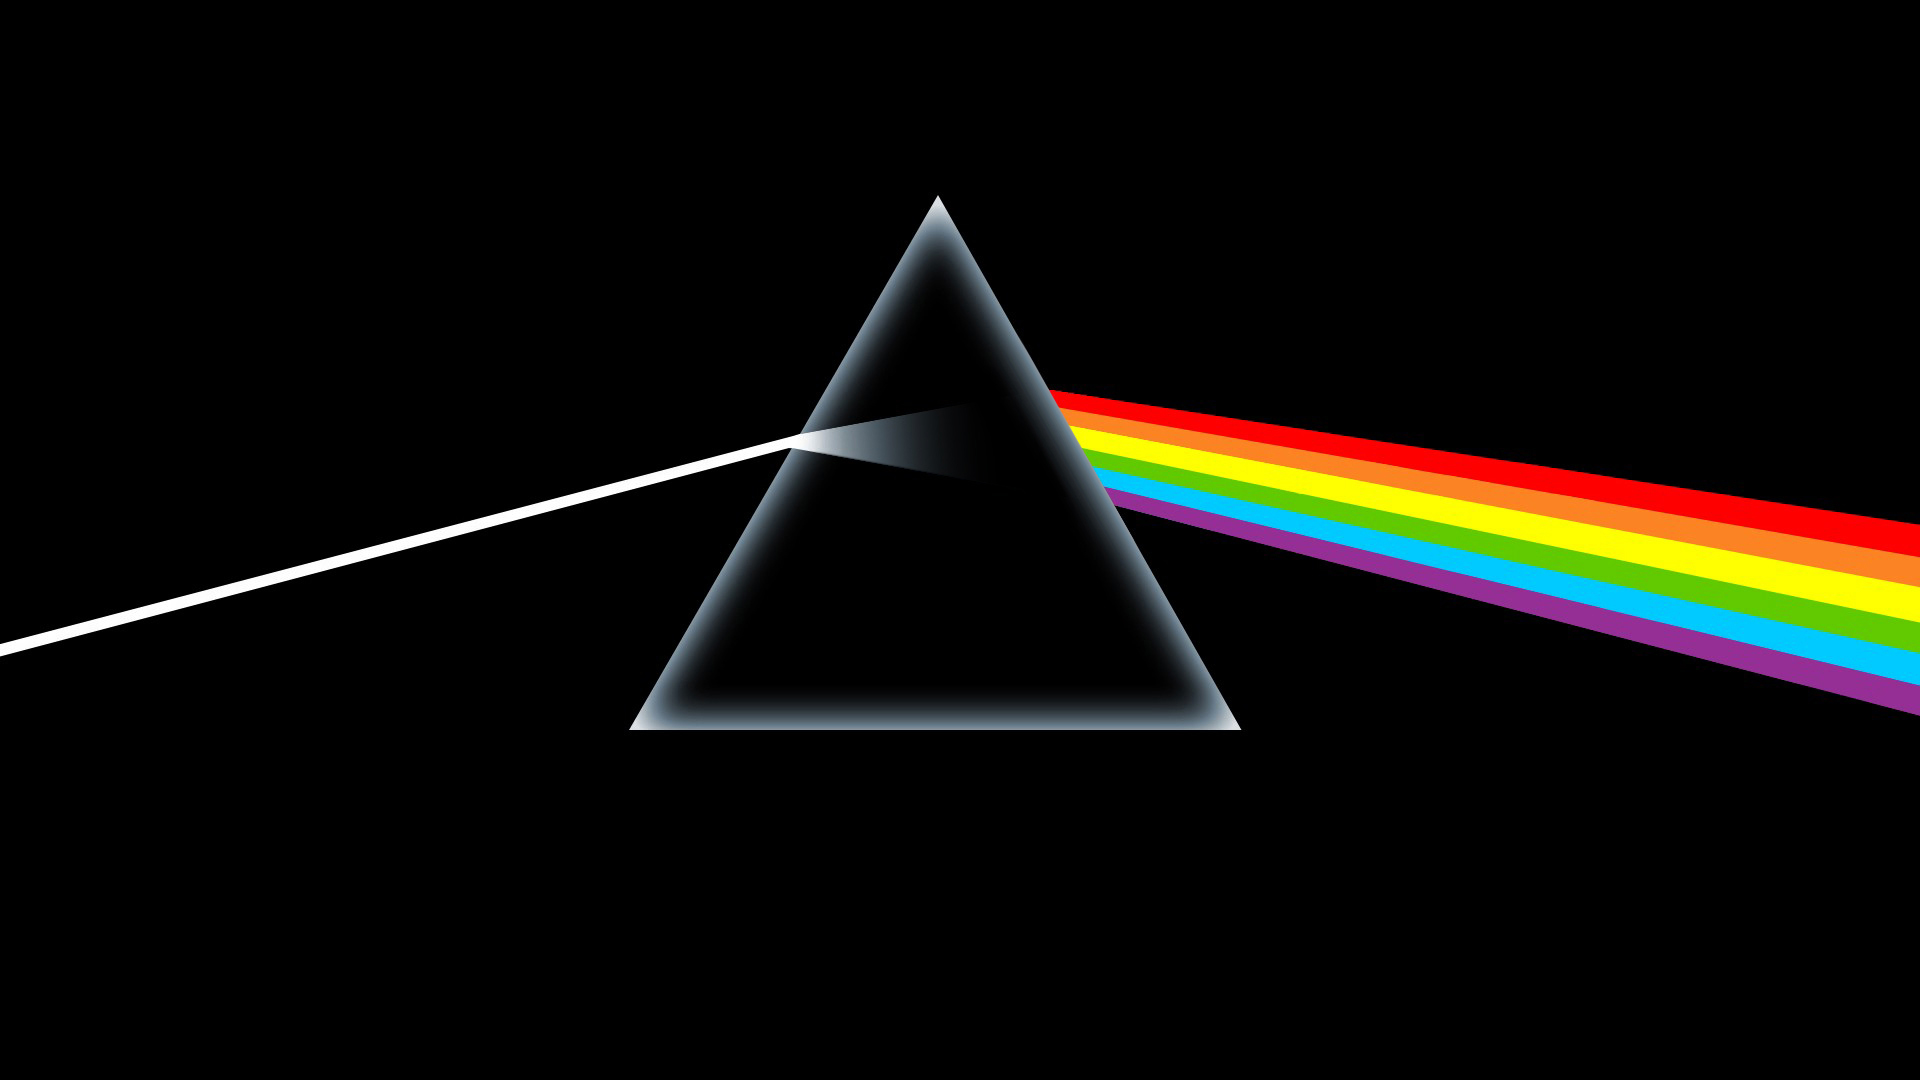 Storm Thorgerson Pink Floyd Hipgnosis The Dark Side Of The Moon Prism Black Background Rainbows Refr 1920x1080